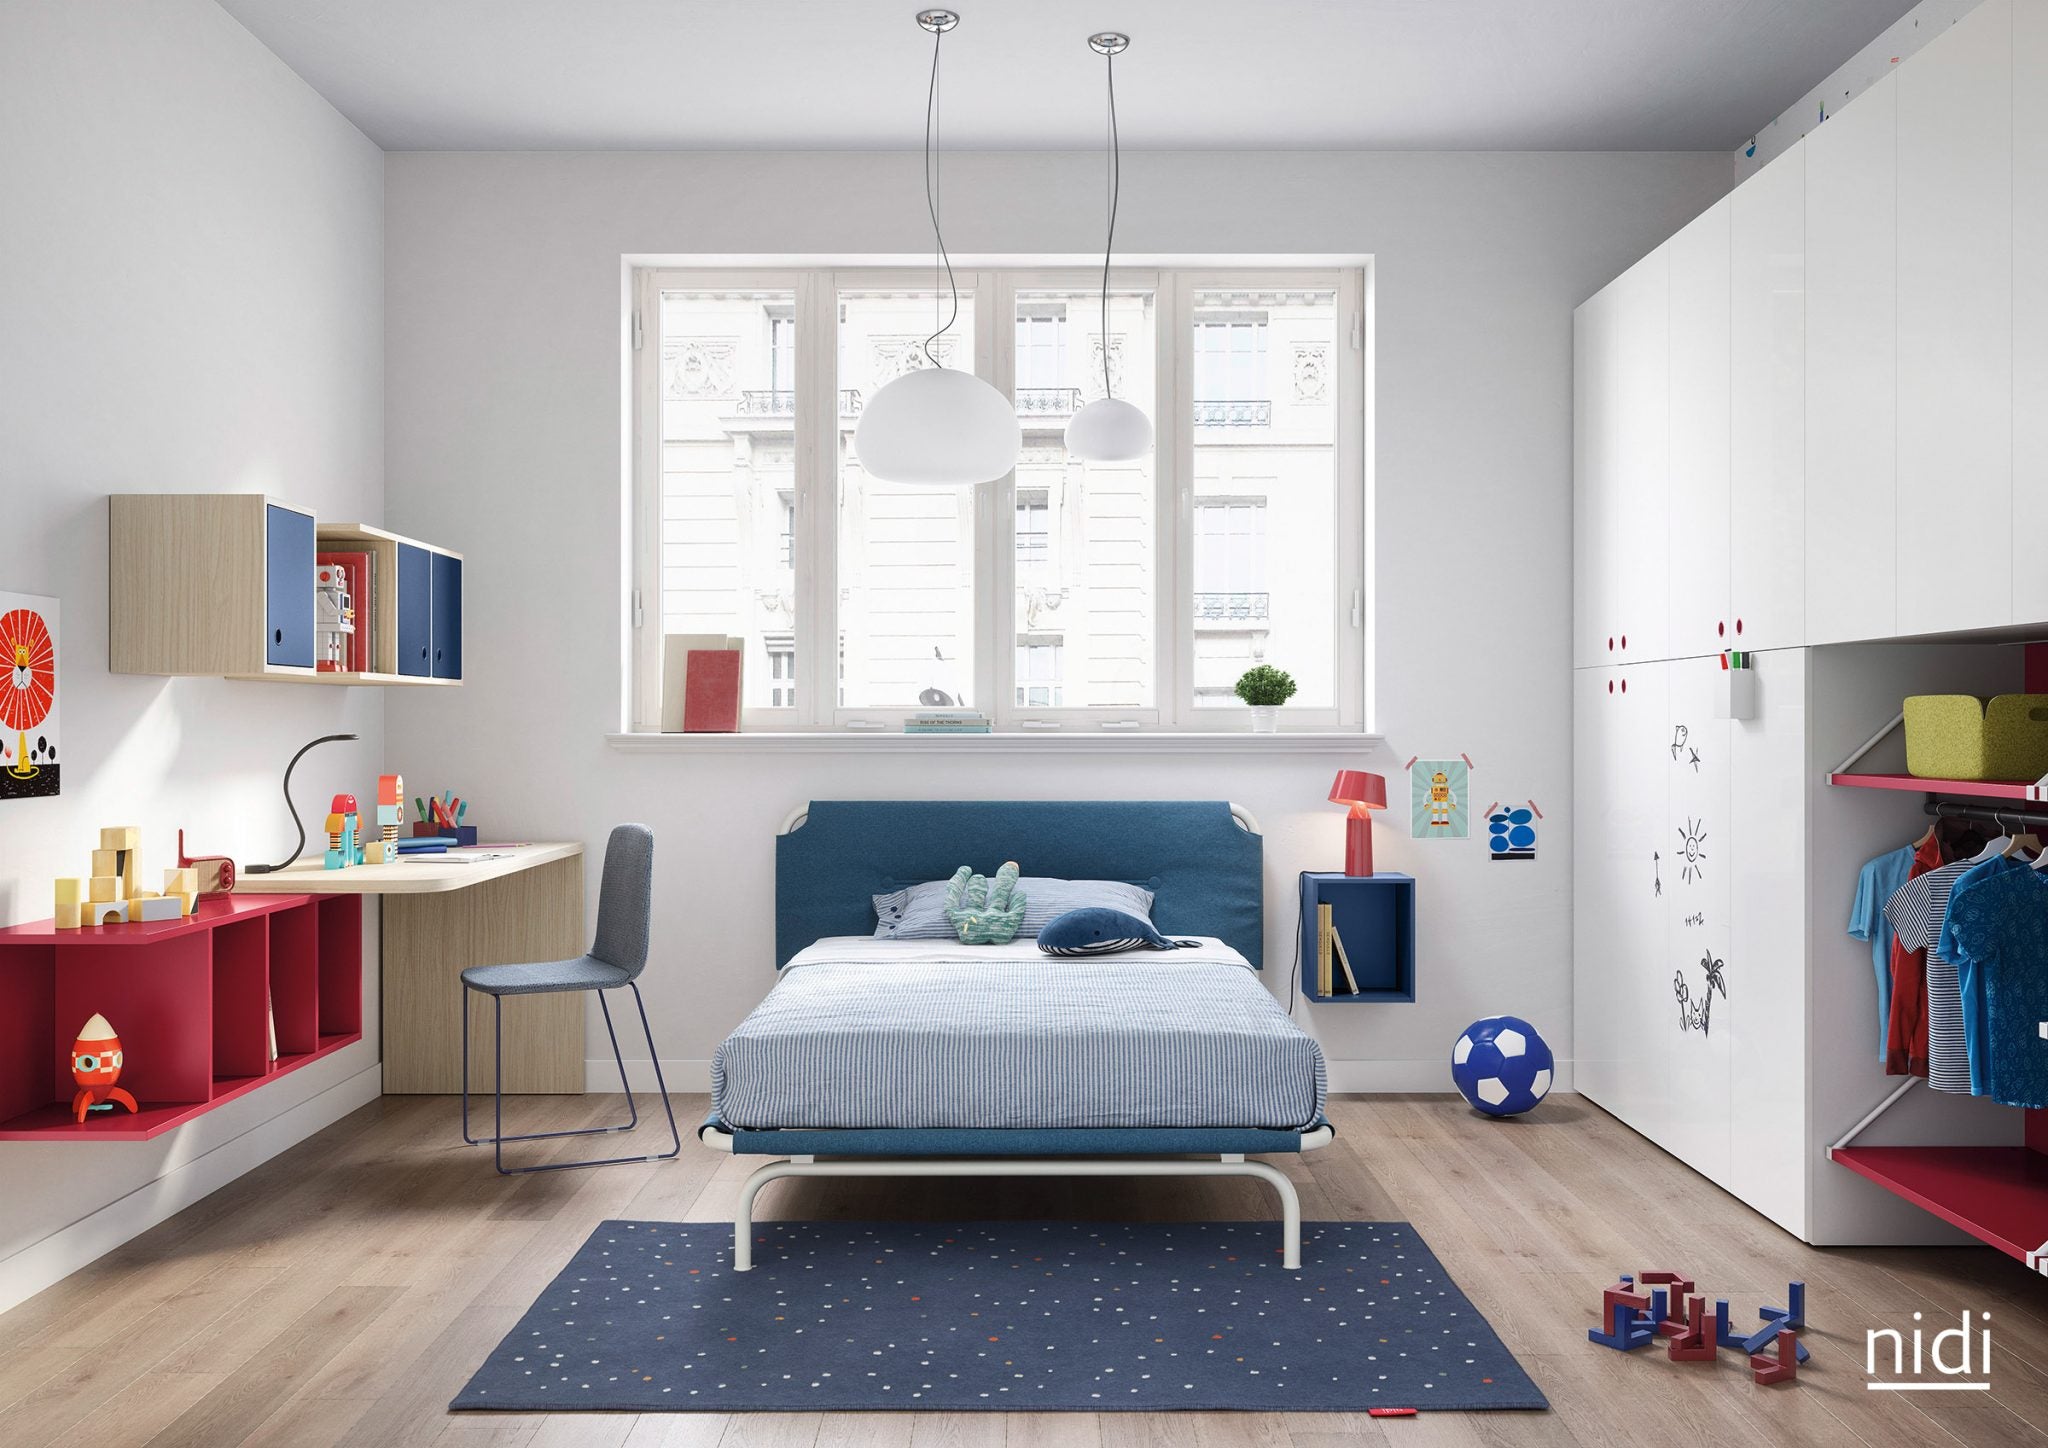 Design Tips For Creating The Perfect Children’s Bedroom